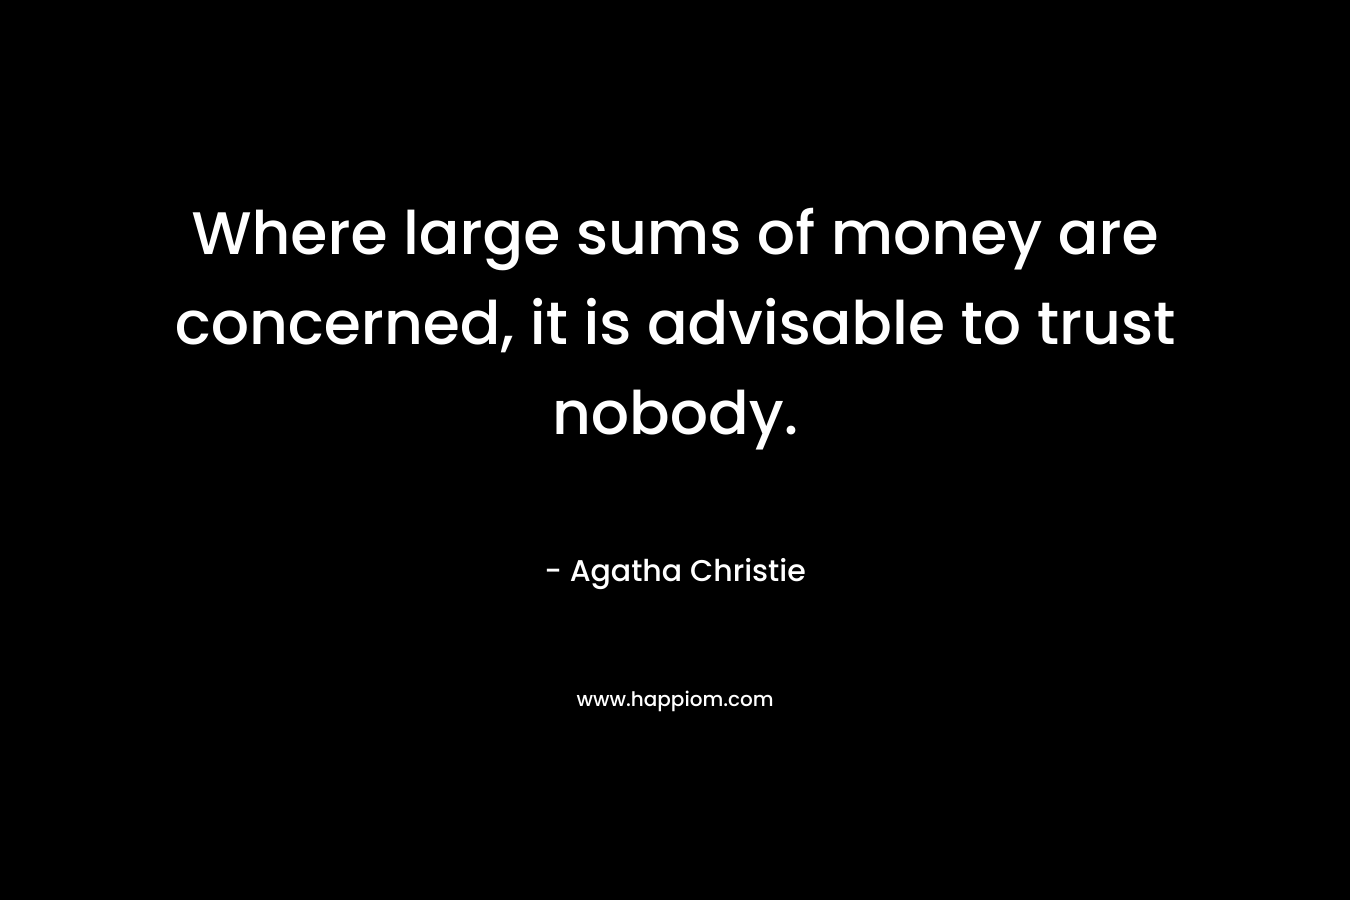 Where large sums of money are concerned, it is advisable to trust nobody.